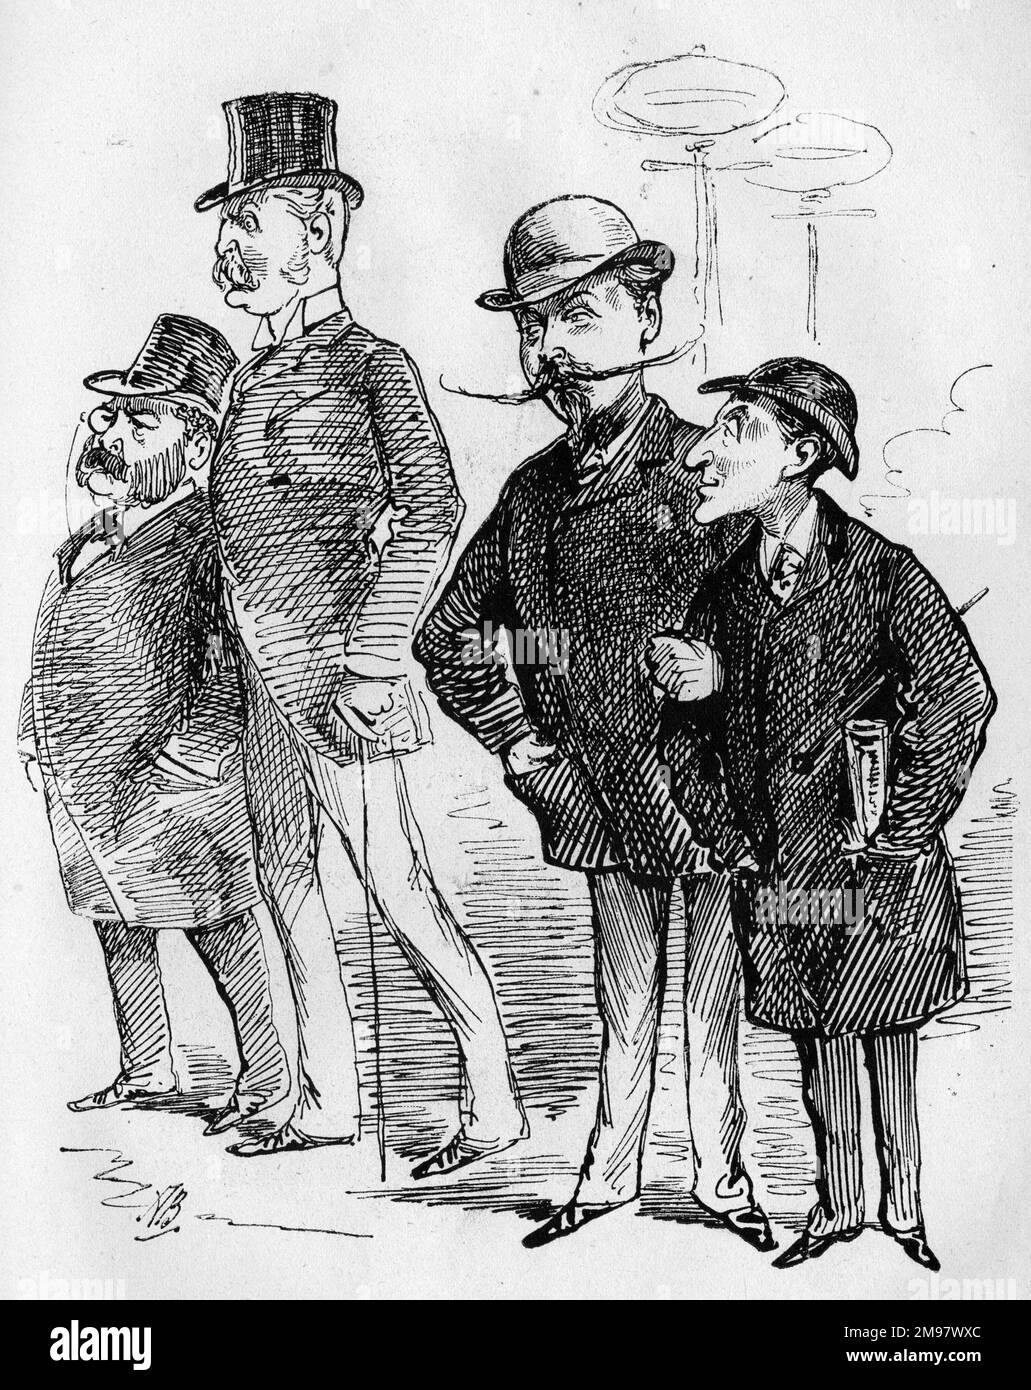 Cartoon, W S Gilbert (1836-1911) and Arthur Sullivan (1842-1900) ignoring their rivals Henry Pottinger Stephens and Edward Solomon in the street -- We never speak as we pass by. Stock Photo